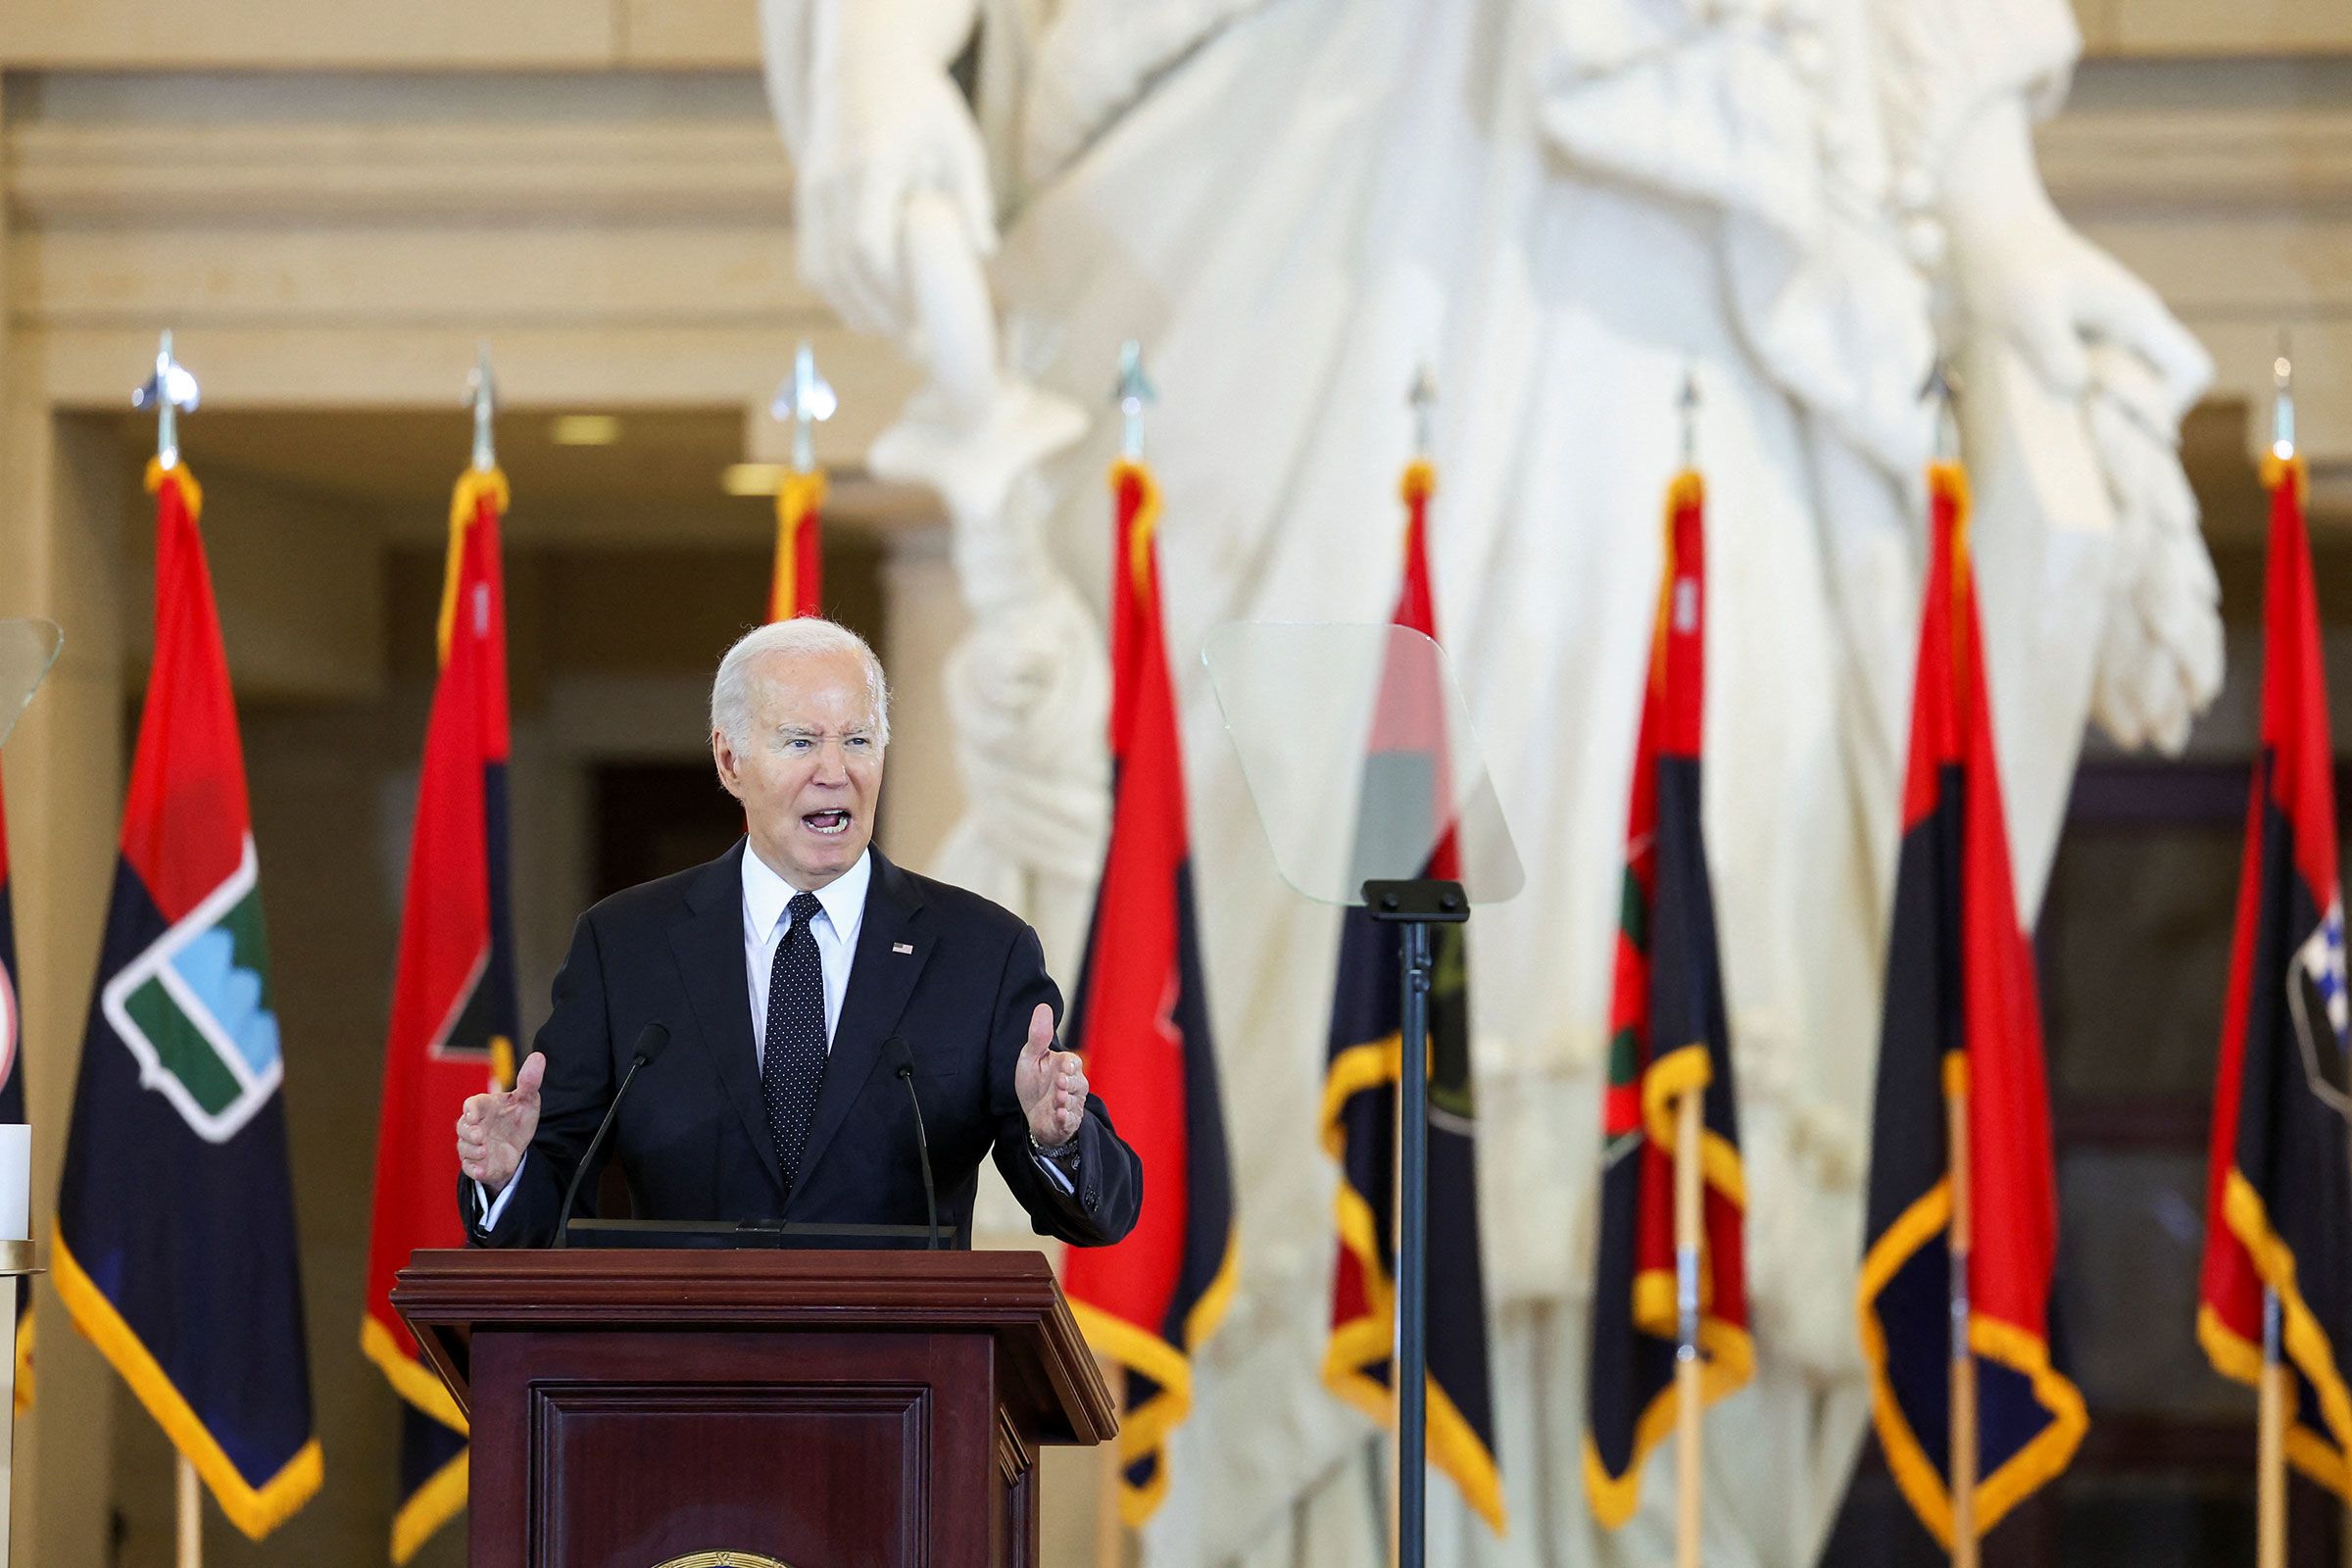 Biden criticizes hatred and emphasizes support for Israel during Holocaust Remembrance Ceremony.